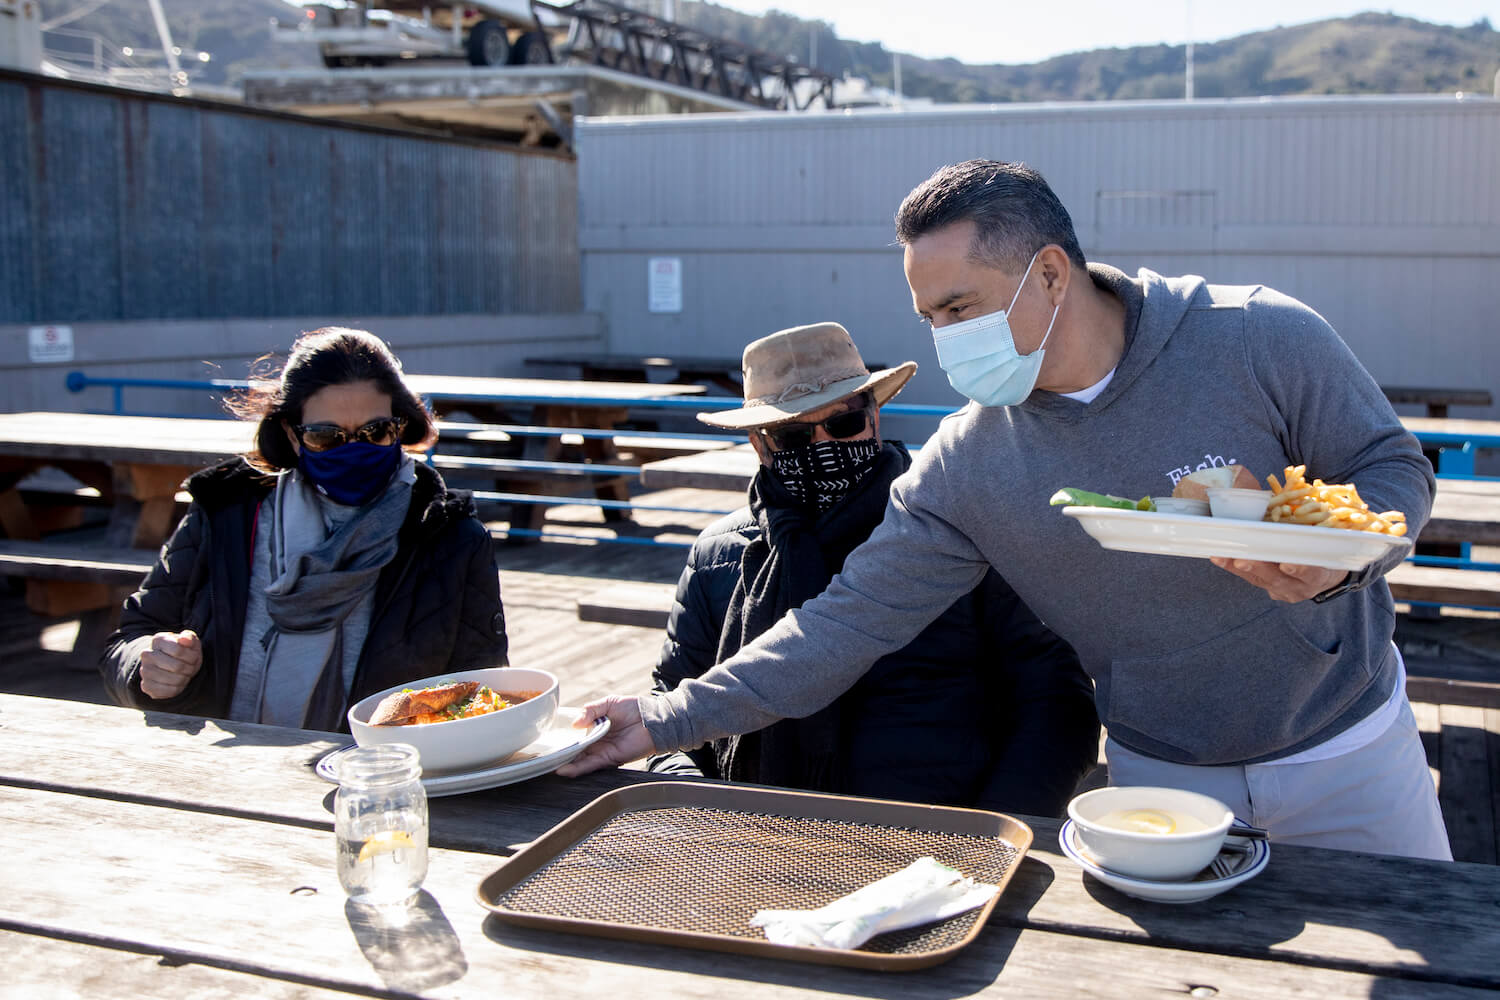 Miguel Batam serves Anoma (left) and Ajith Amerasekera of Berkeley their lunch while seated in the outside patio area at Fish restaurant in Sausalito, Calif. Monday, January 25, 2021.